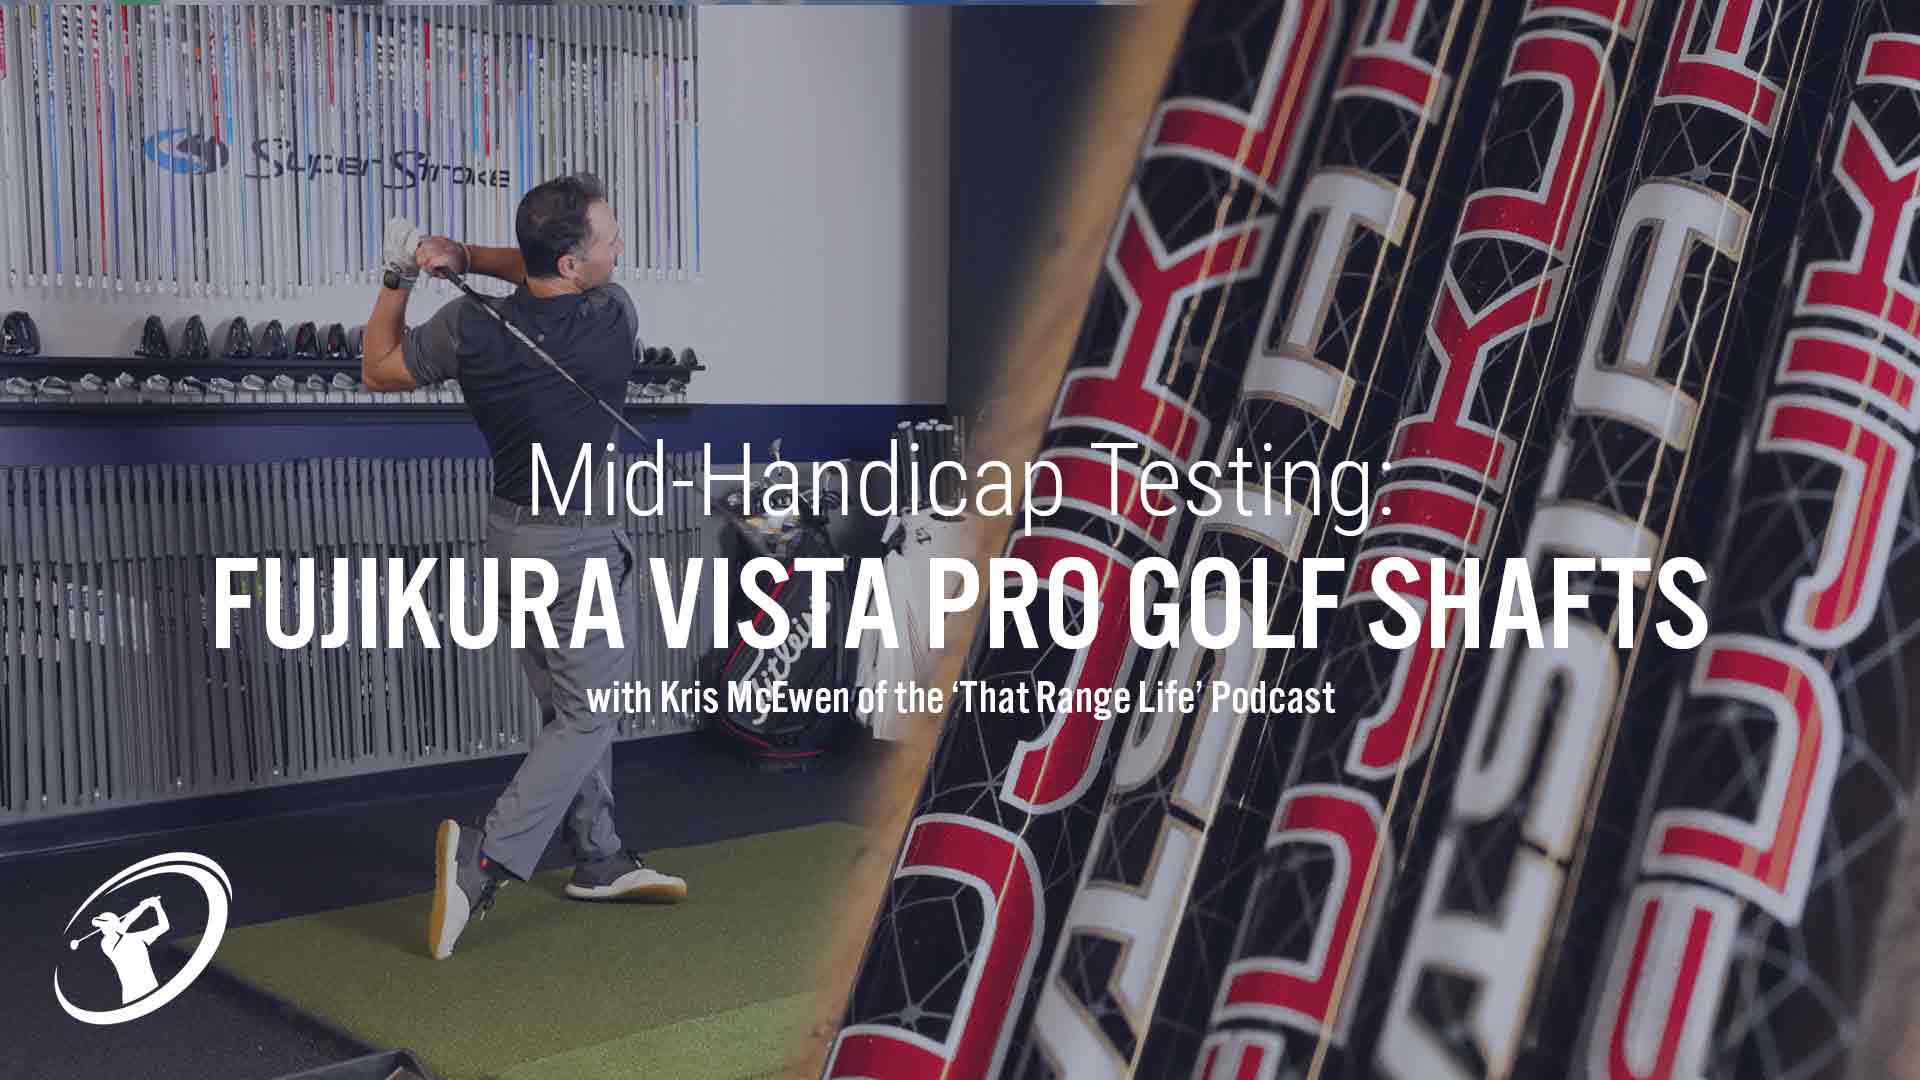 Is Fujikura's VISTA PRO shaft really the most versatile in the industry?